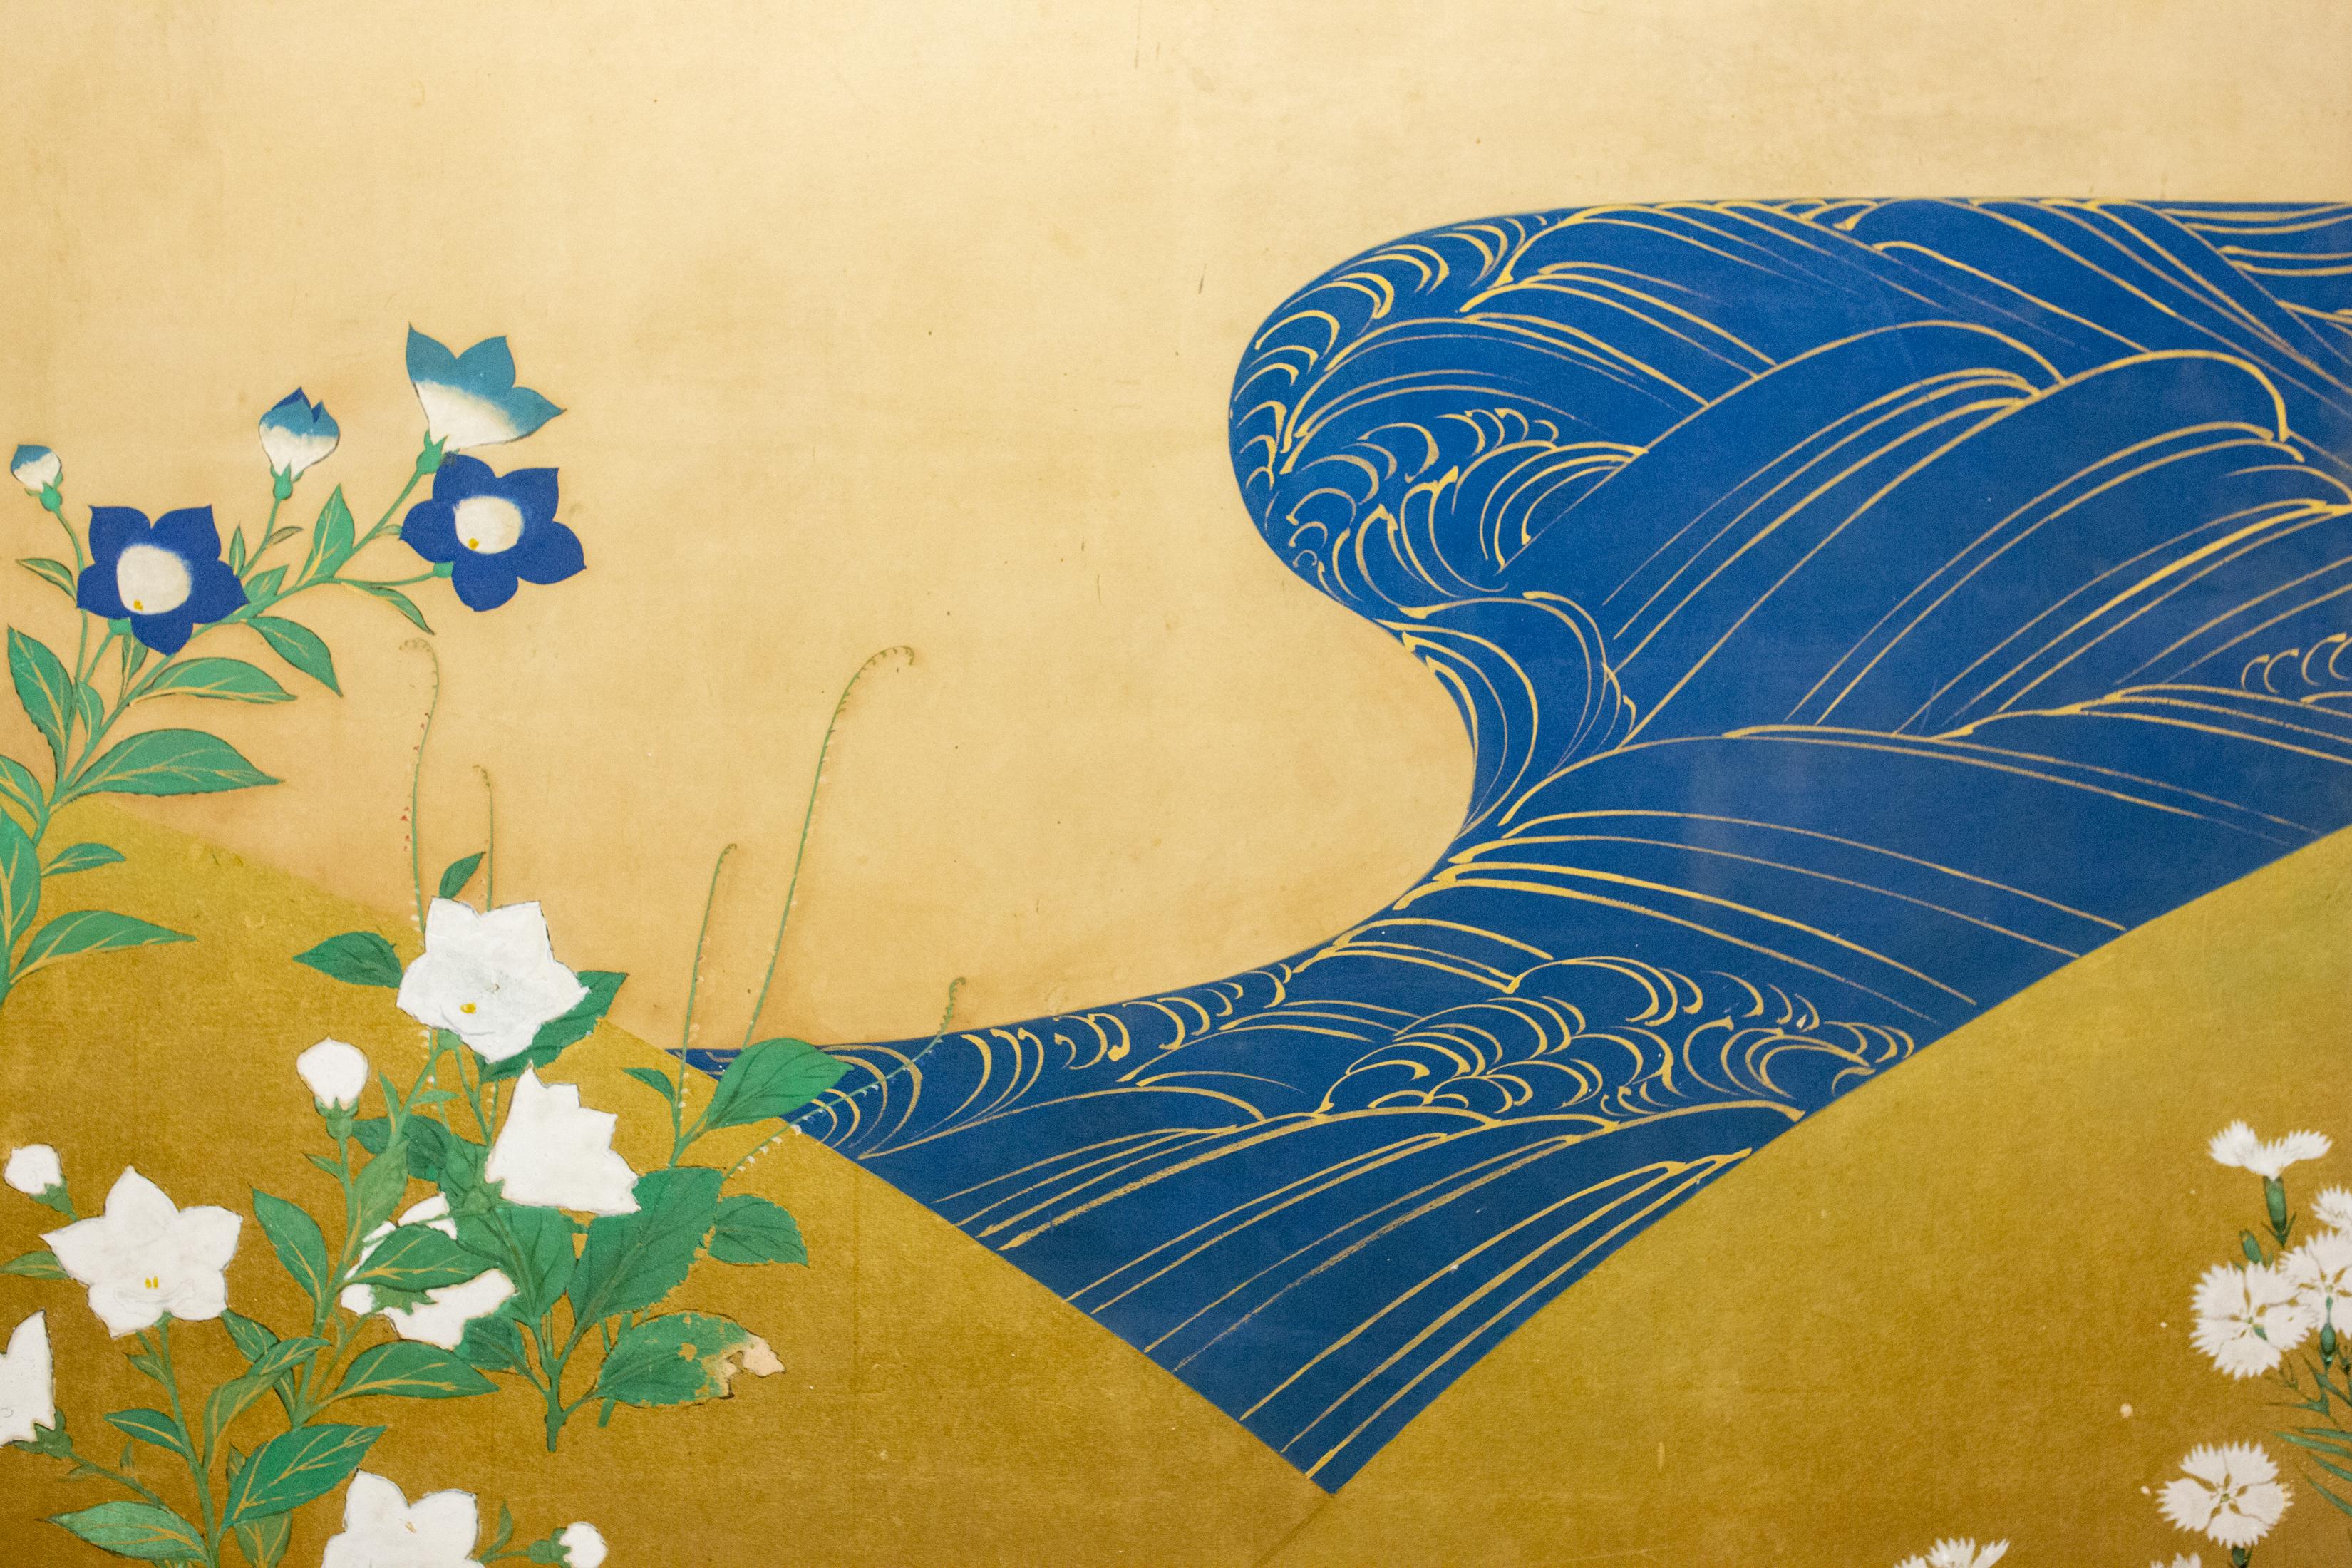 Early 20th Century Japanese Two-Panel Screen, Rimpa and Deco Style Painting of Flowers by Stream